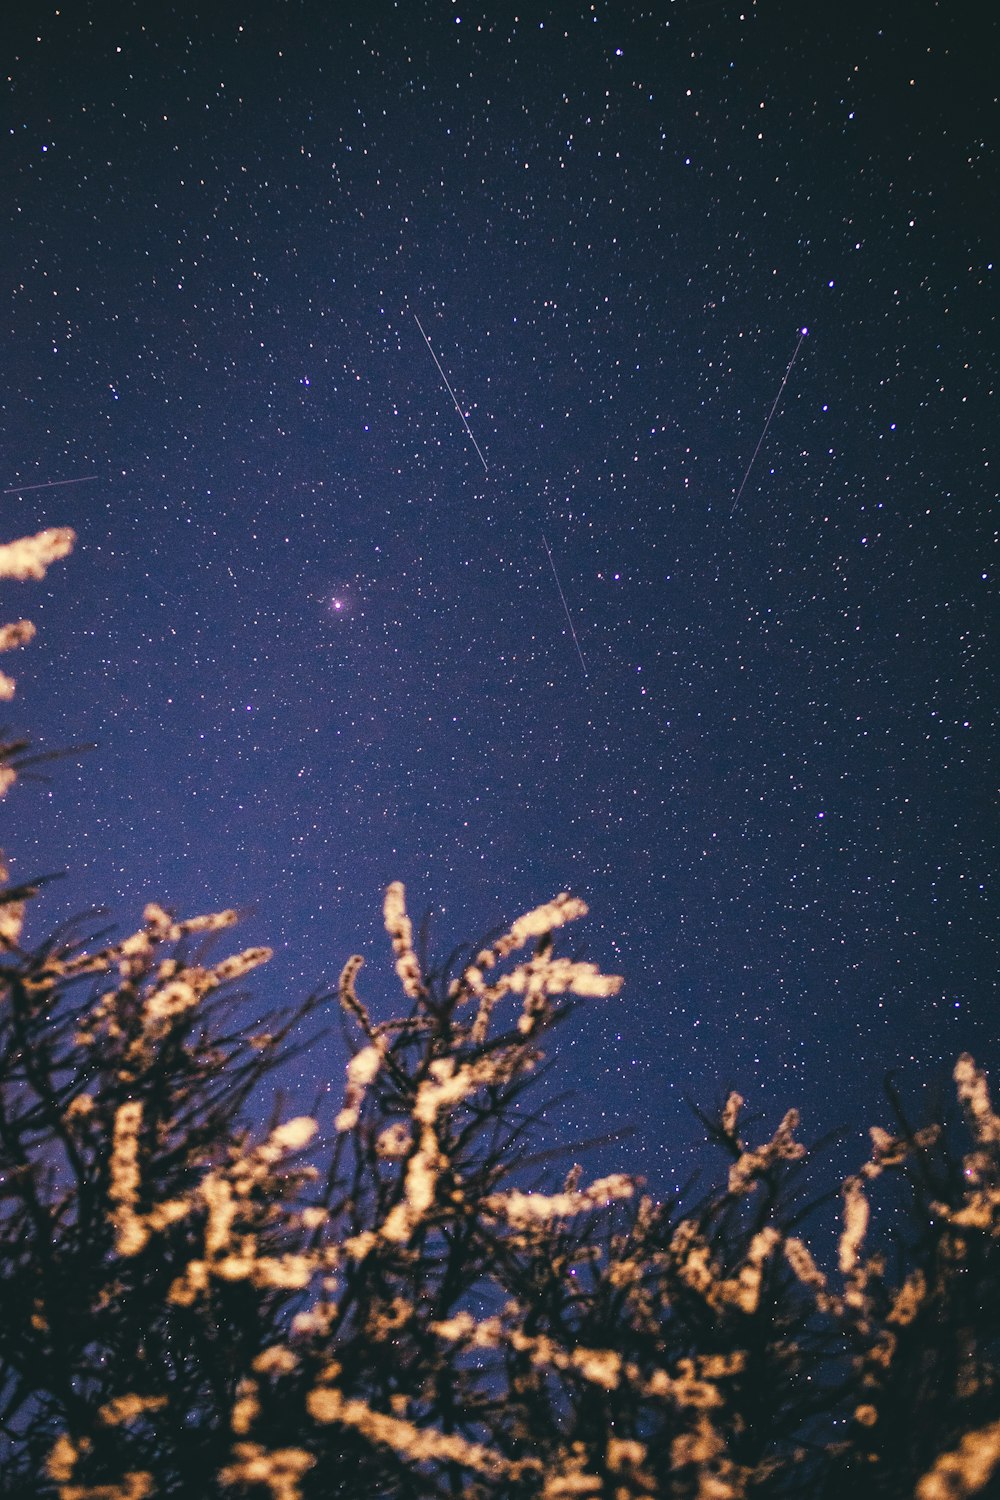 a night sky with stars and a shooting star